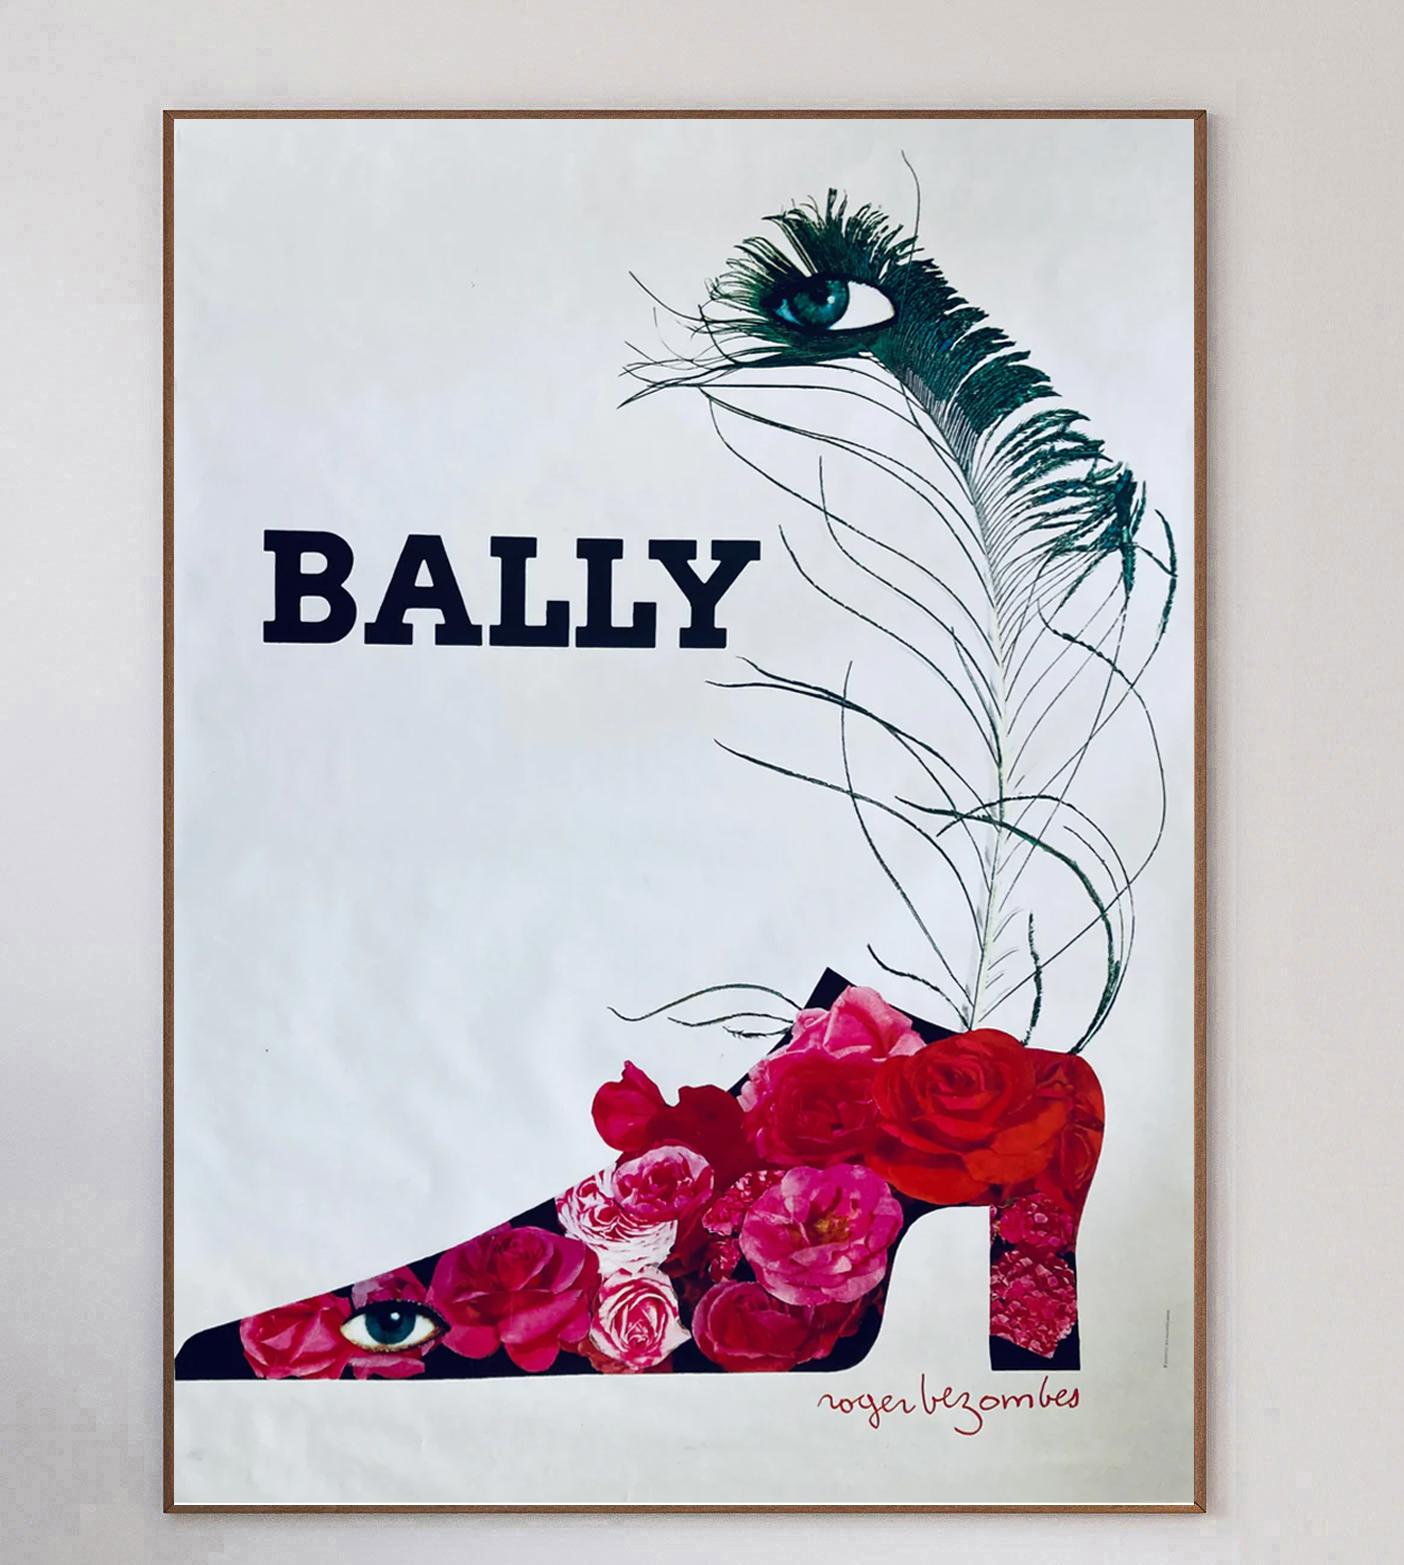 French commercial artist Roger Bezombes created this beautiful extra-large poster for Bally in 1980.

Luxury Swiss shoemaker Bally famously worked with many celebrated poster artists during iconic collaborations on posters throughout the 20th